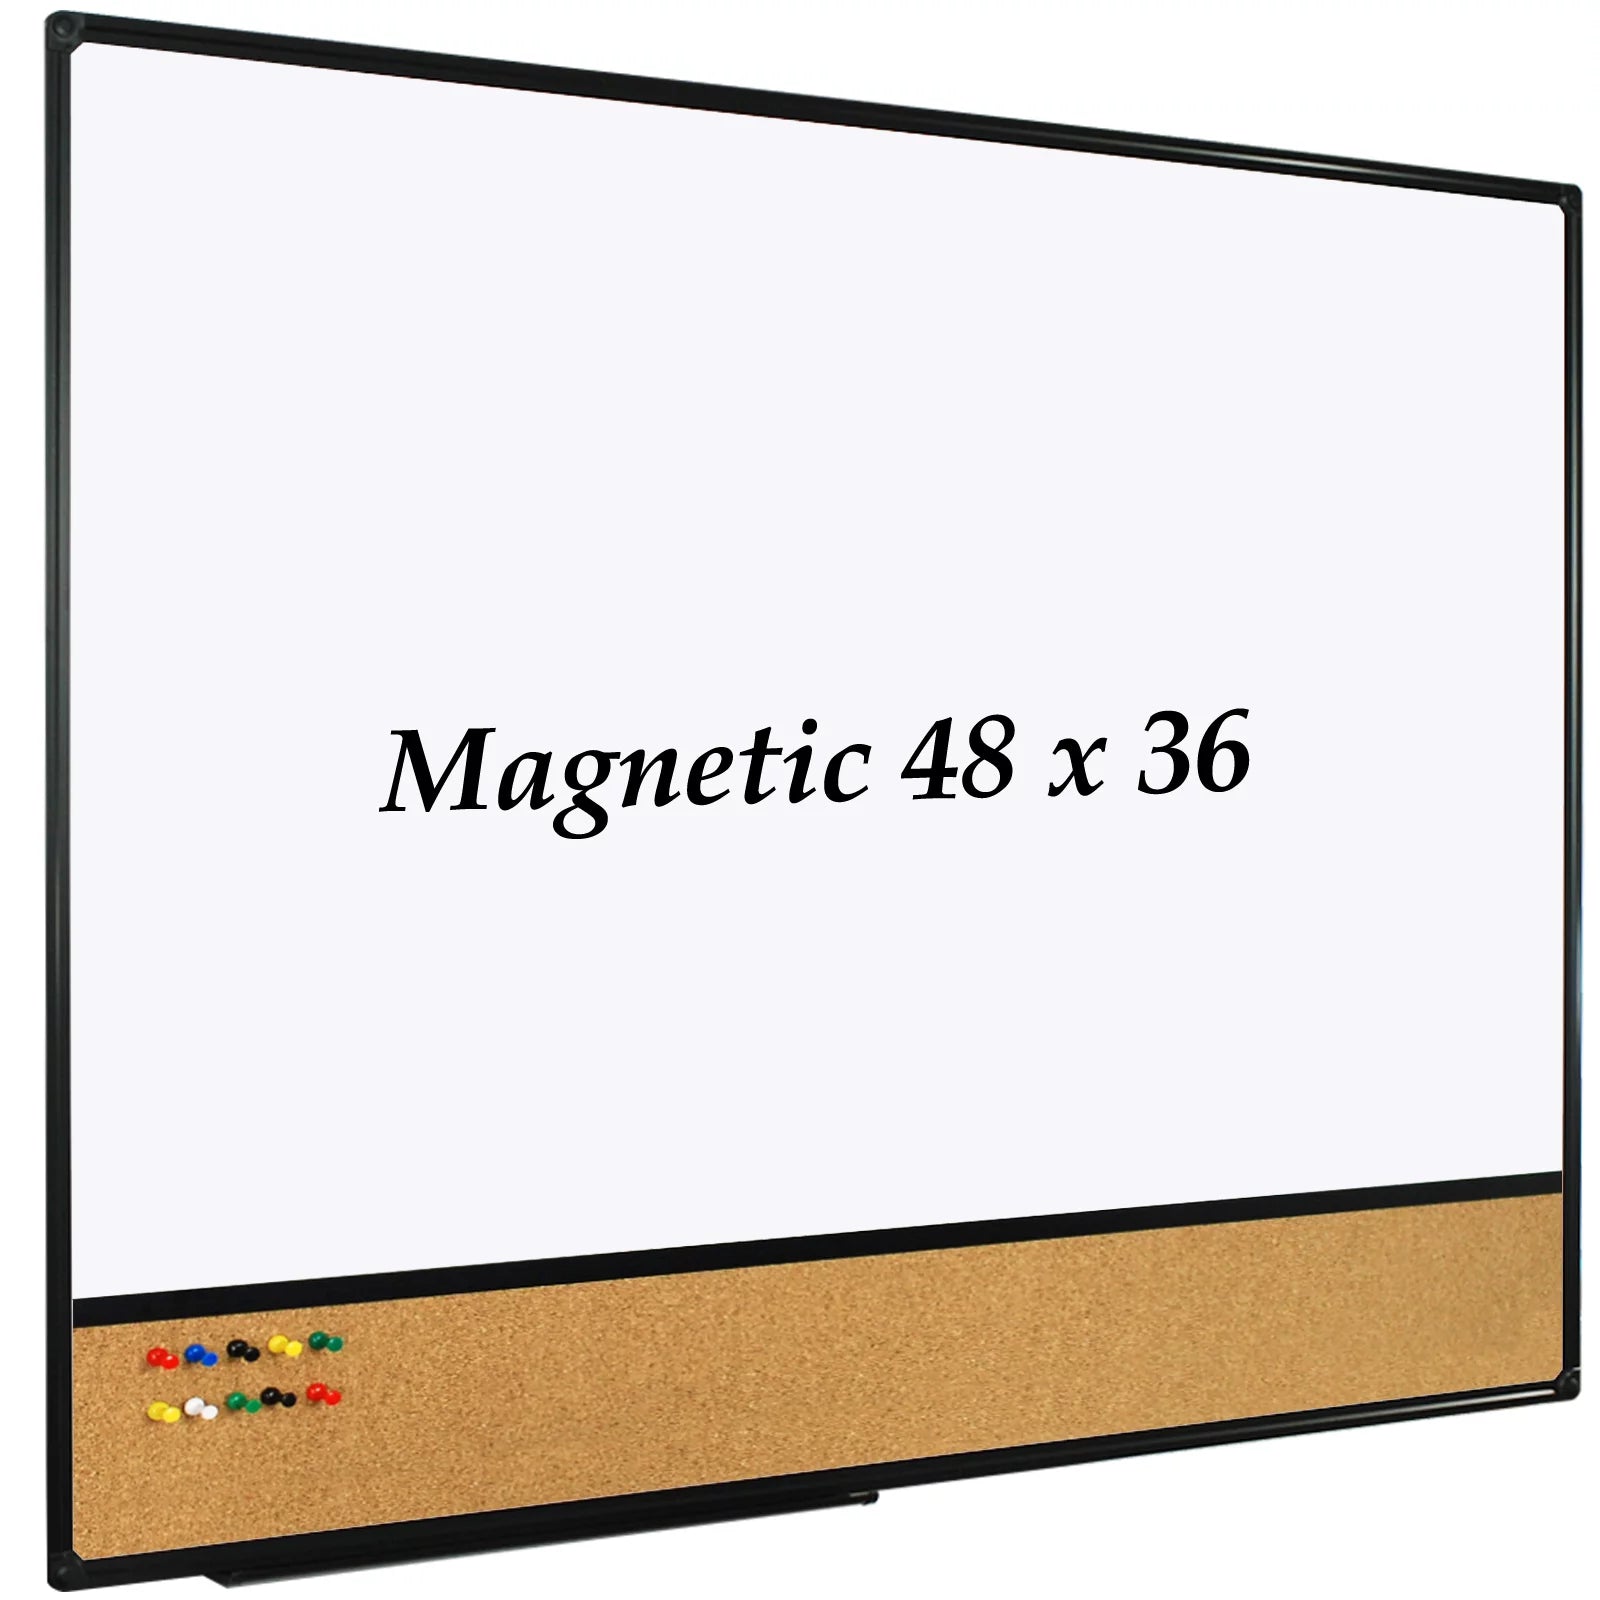 The Top Benefits of the 48x36 Magnetic Whiteboard